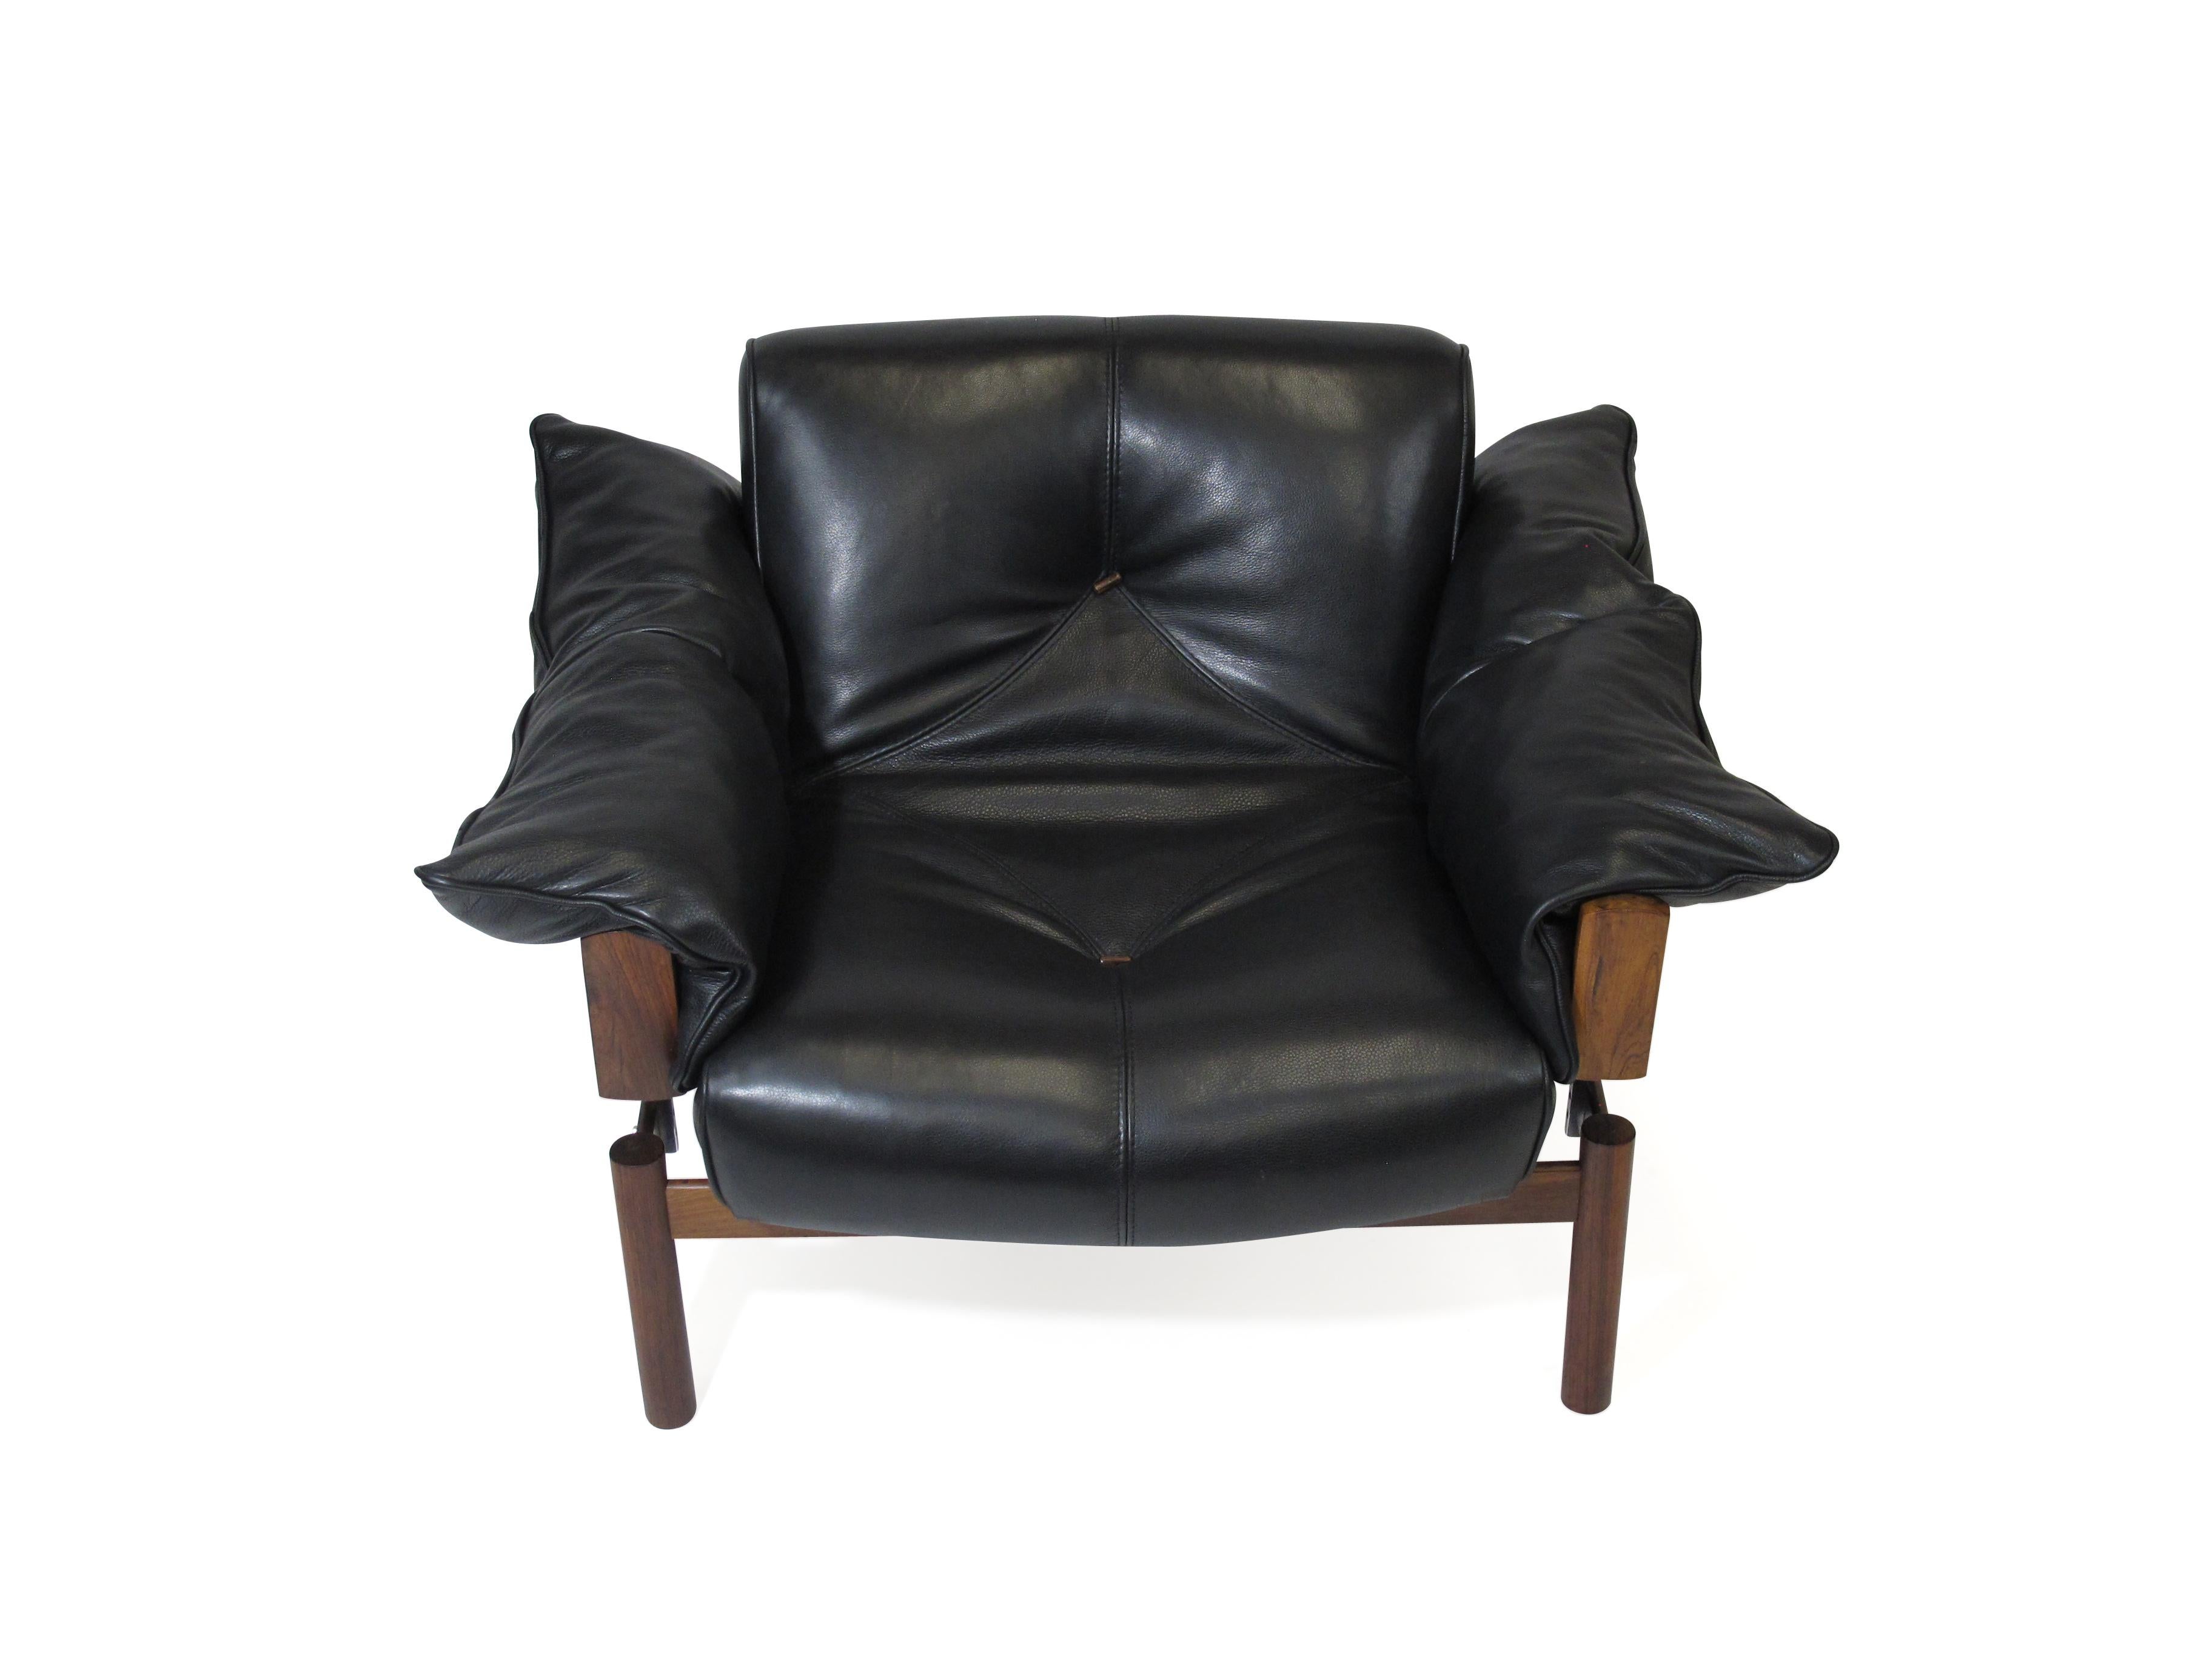 20th Century 1960 Percival Lafer Brazilian Rosewood Sofa and Chair in Black Leather